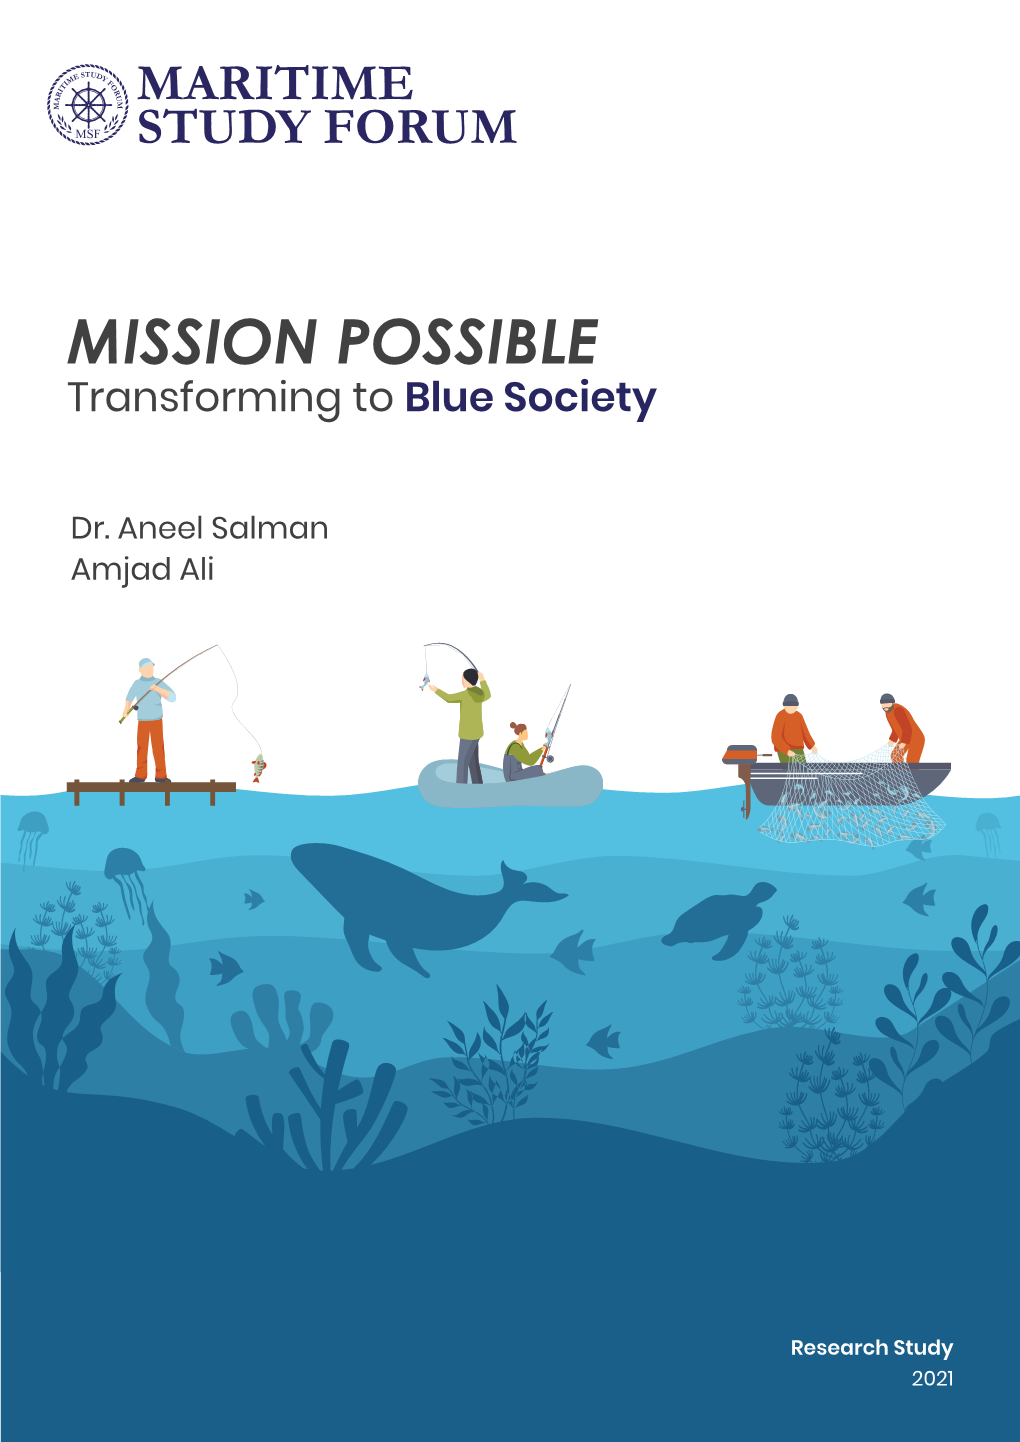 MISSION POSSIBLE Transforming to Blue Society